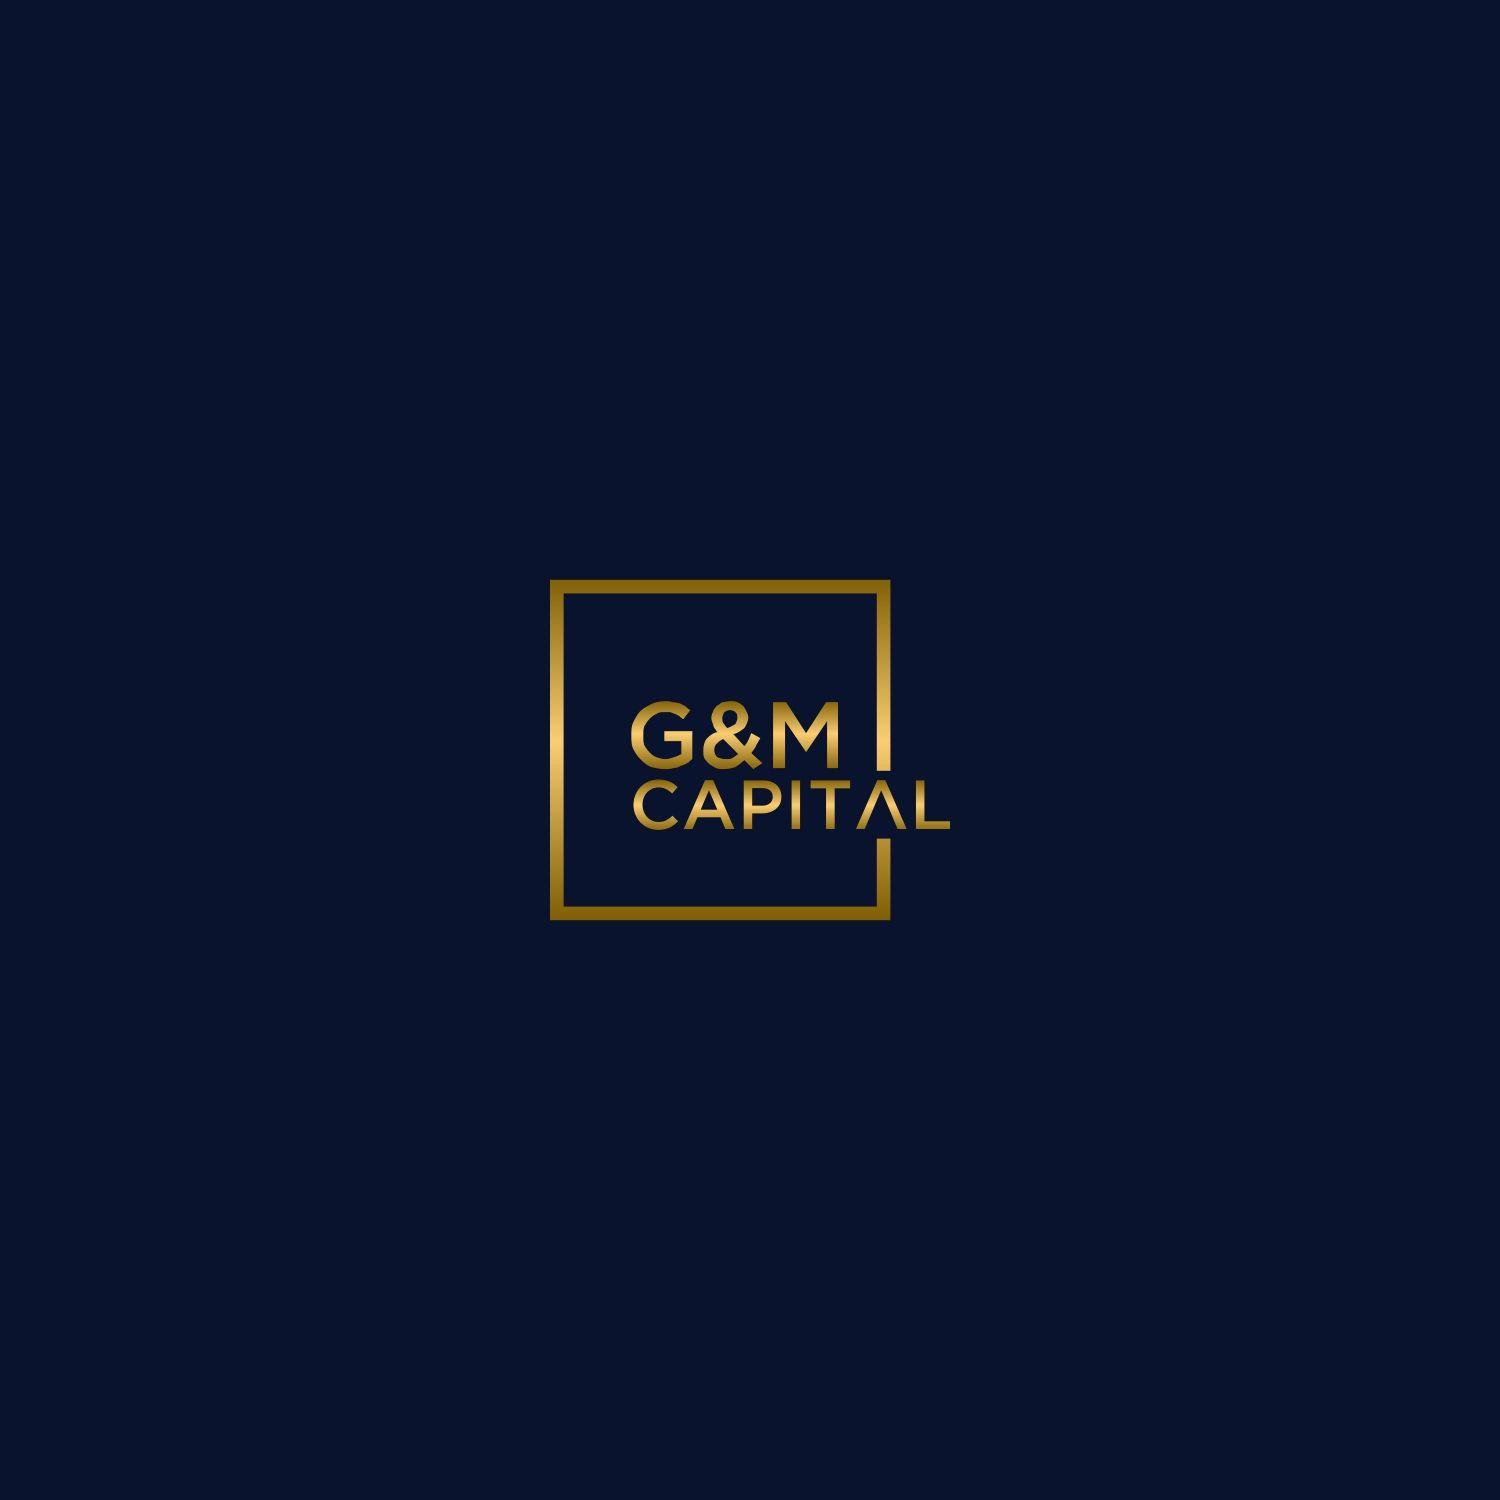 Blue and Yellow Capital M Logo - Investment Logo Design for G&M Capital by Hi-Tech Solution | Design ...